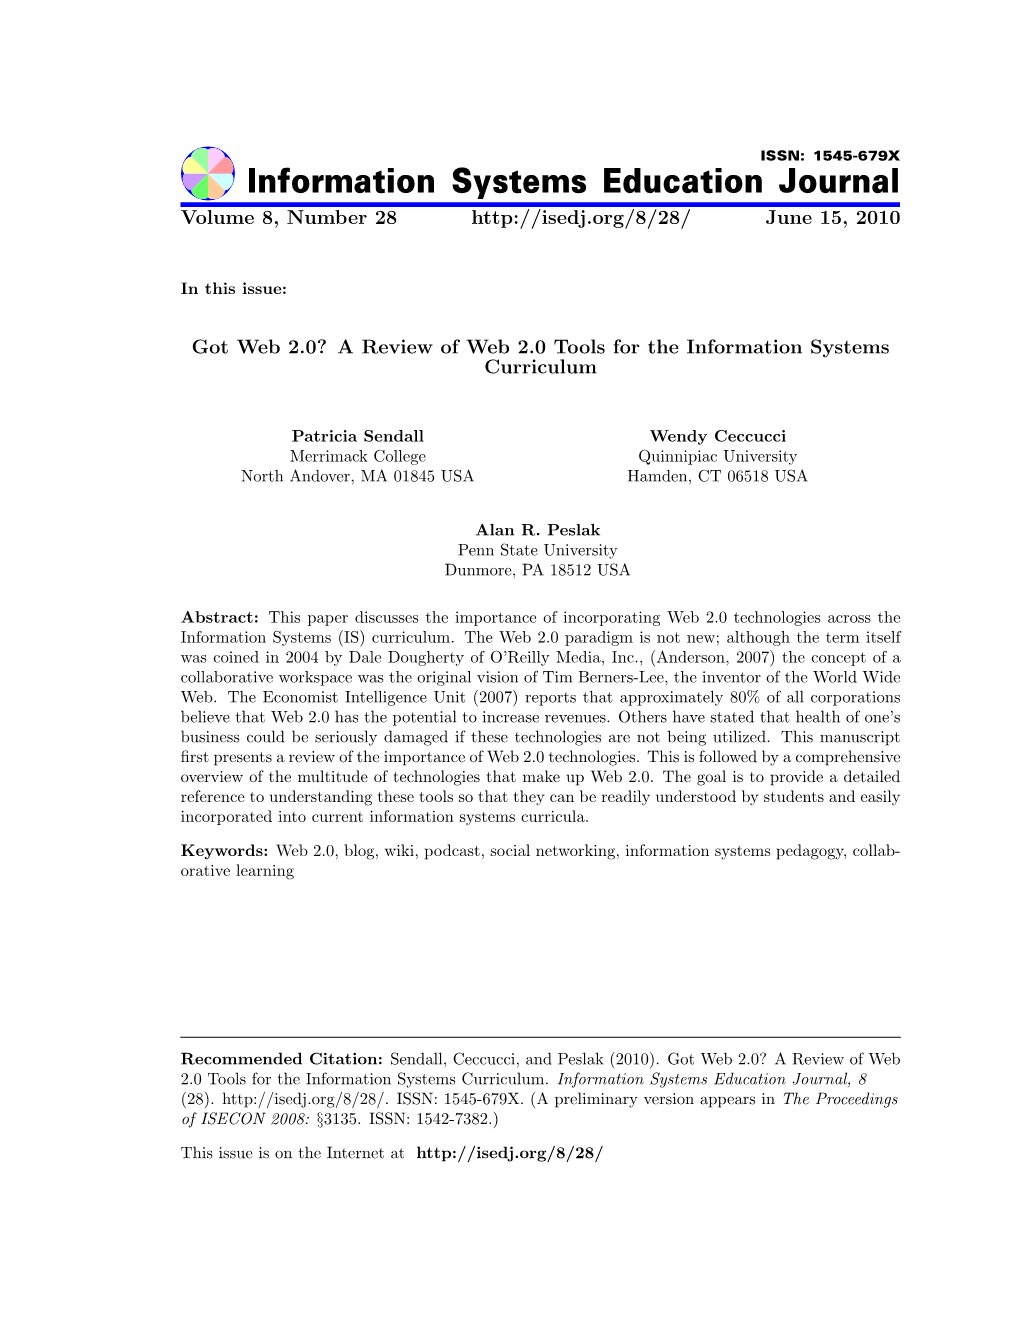 Got Web 2.0? a Review of Web 2.0 Tools for the Information Systems Curriculum